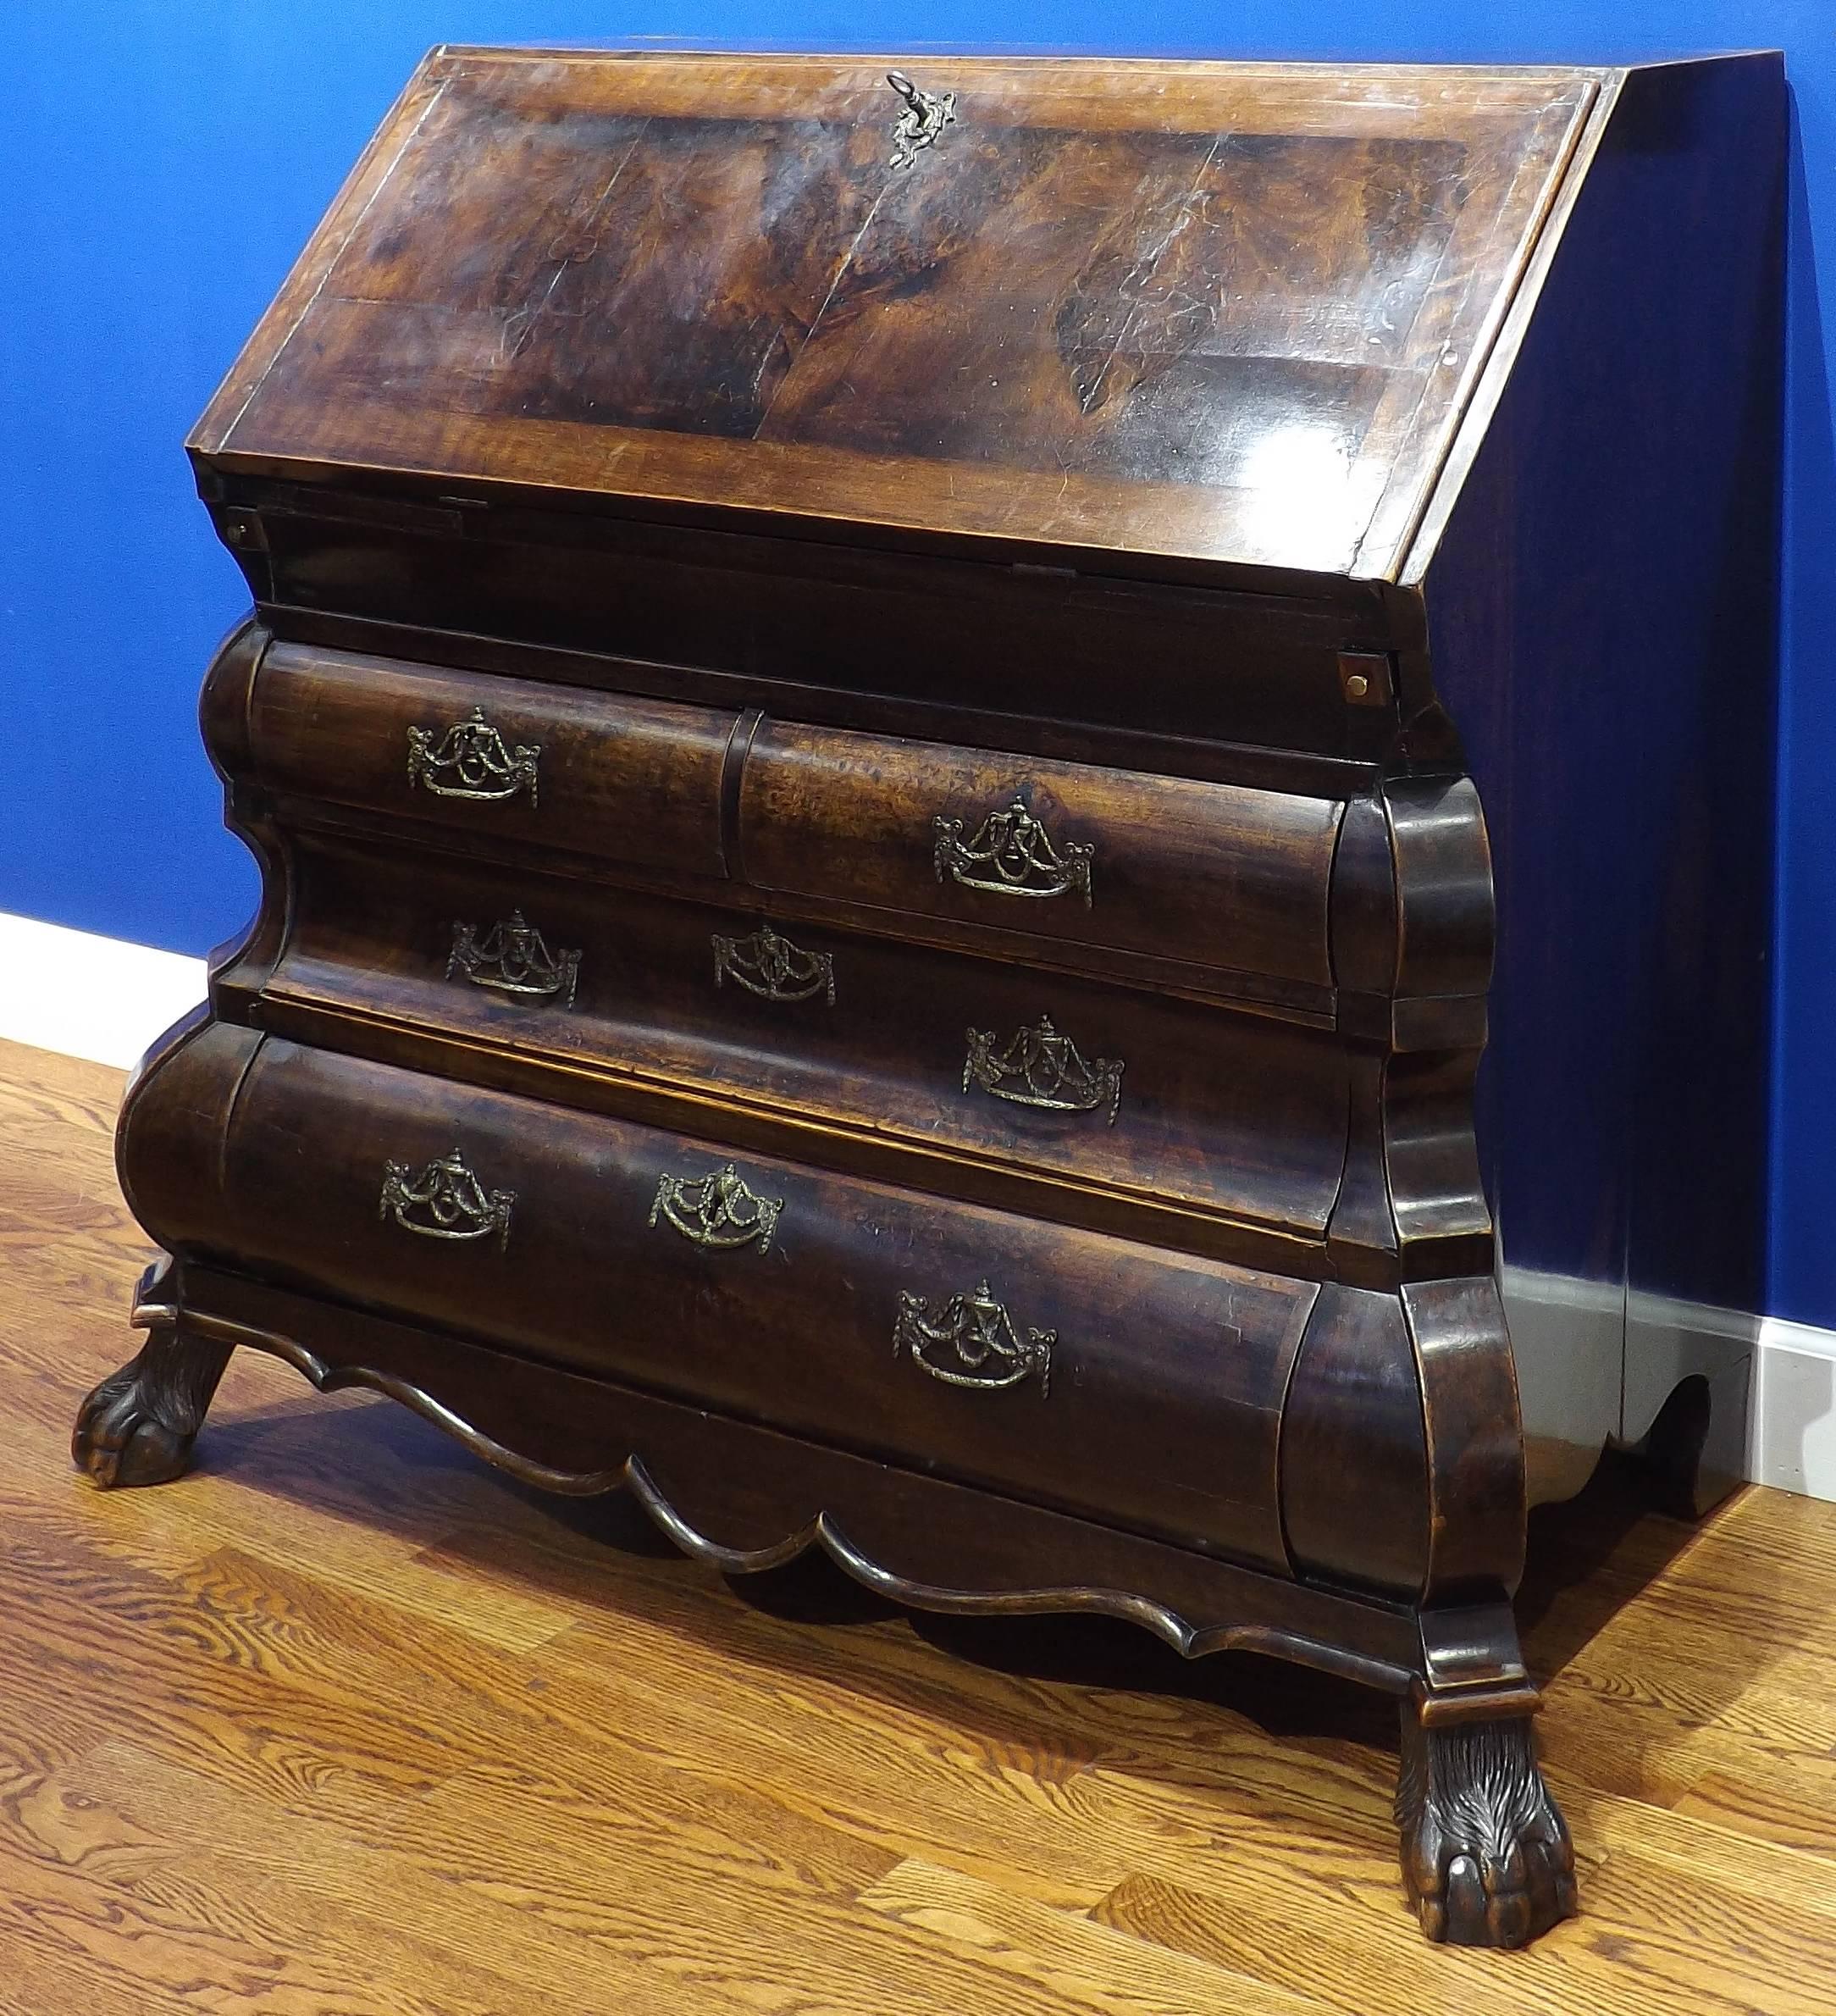 A handsome double bowed drop front desk with carved claw and ball feet dating from the 18th century. The bottom has four spacious drawers while the folding writing surface closes to protect numerous smaller drawers and a number of secret